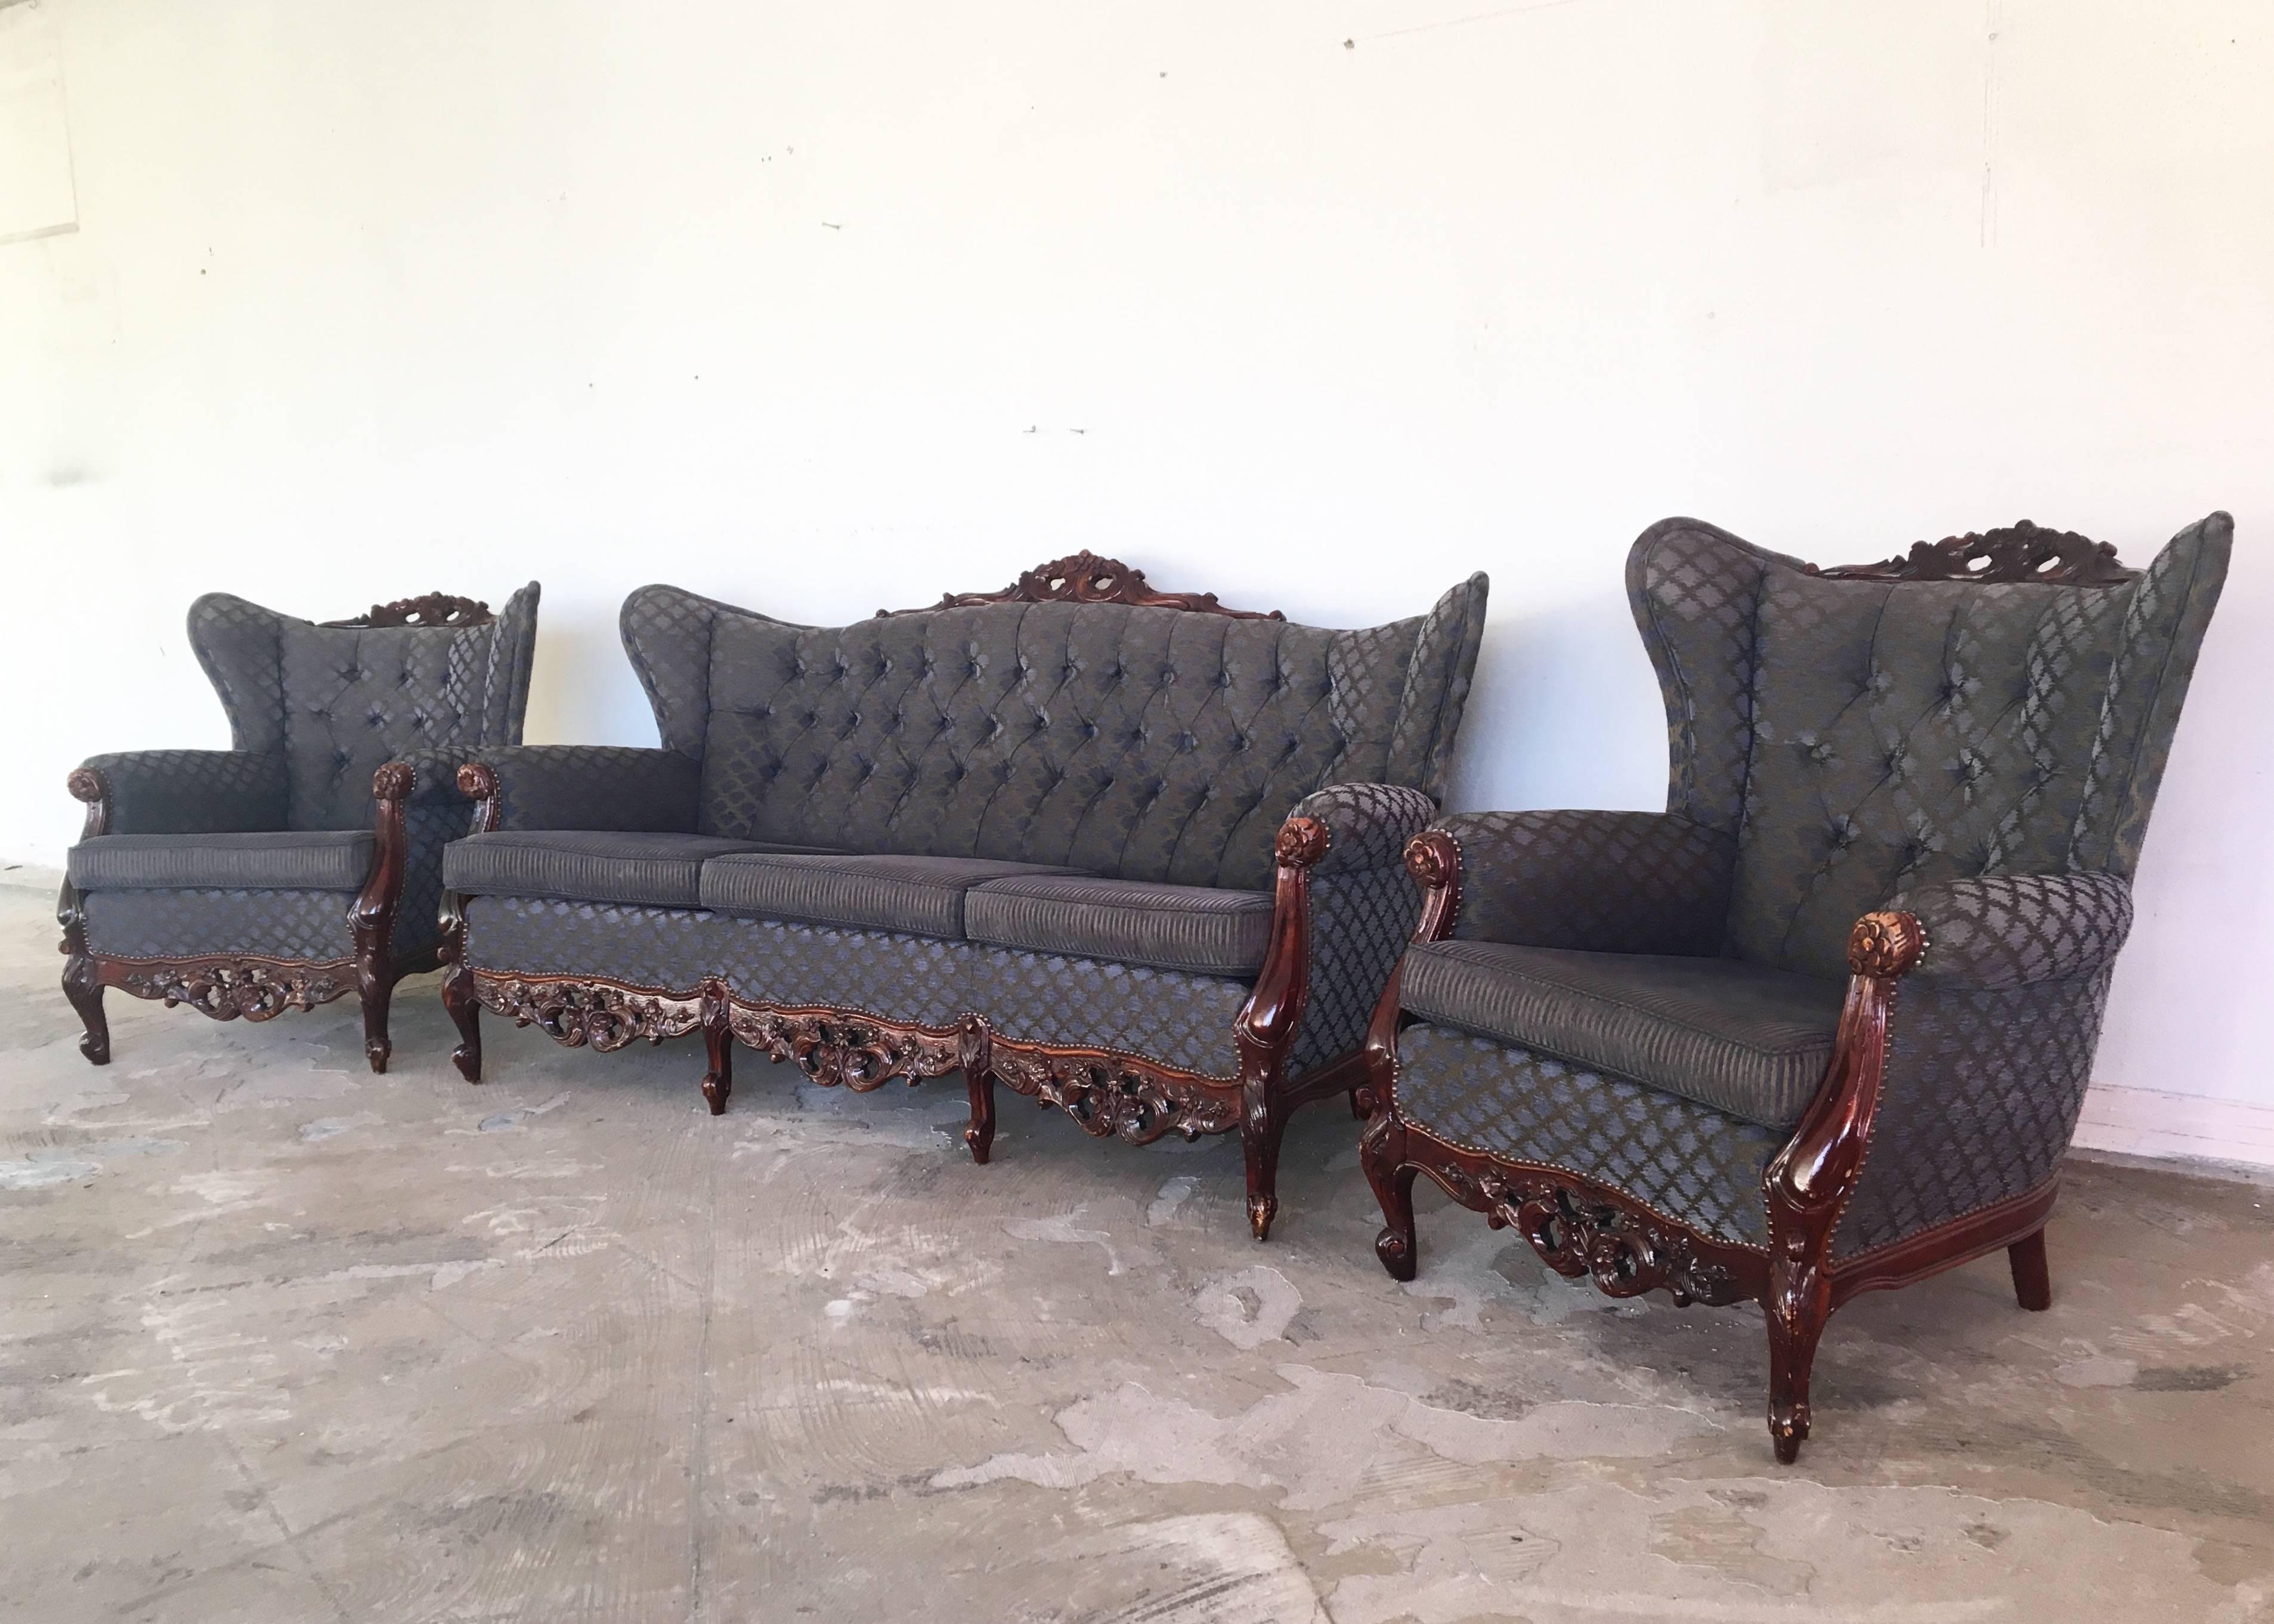 This three-piece living room or sofa set, consists of a three-seat sofa and two wingback armchairs. The set features sculptural carved wood and capititonné backrests. The fabric overall looks purple, blue or gray with gold, depending how the light